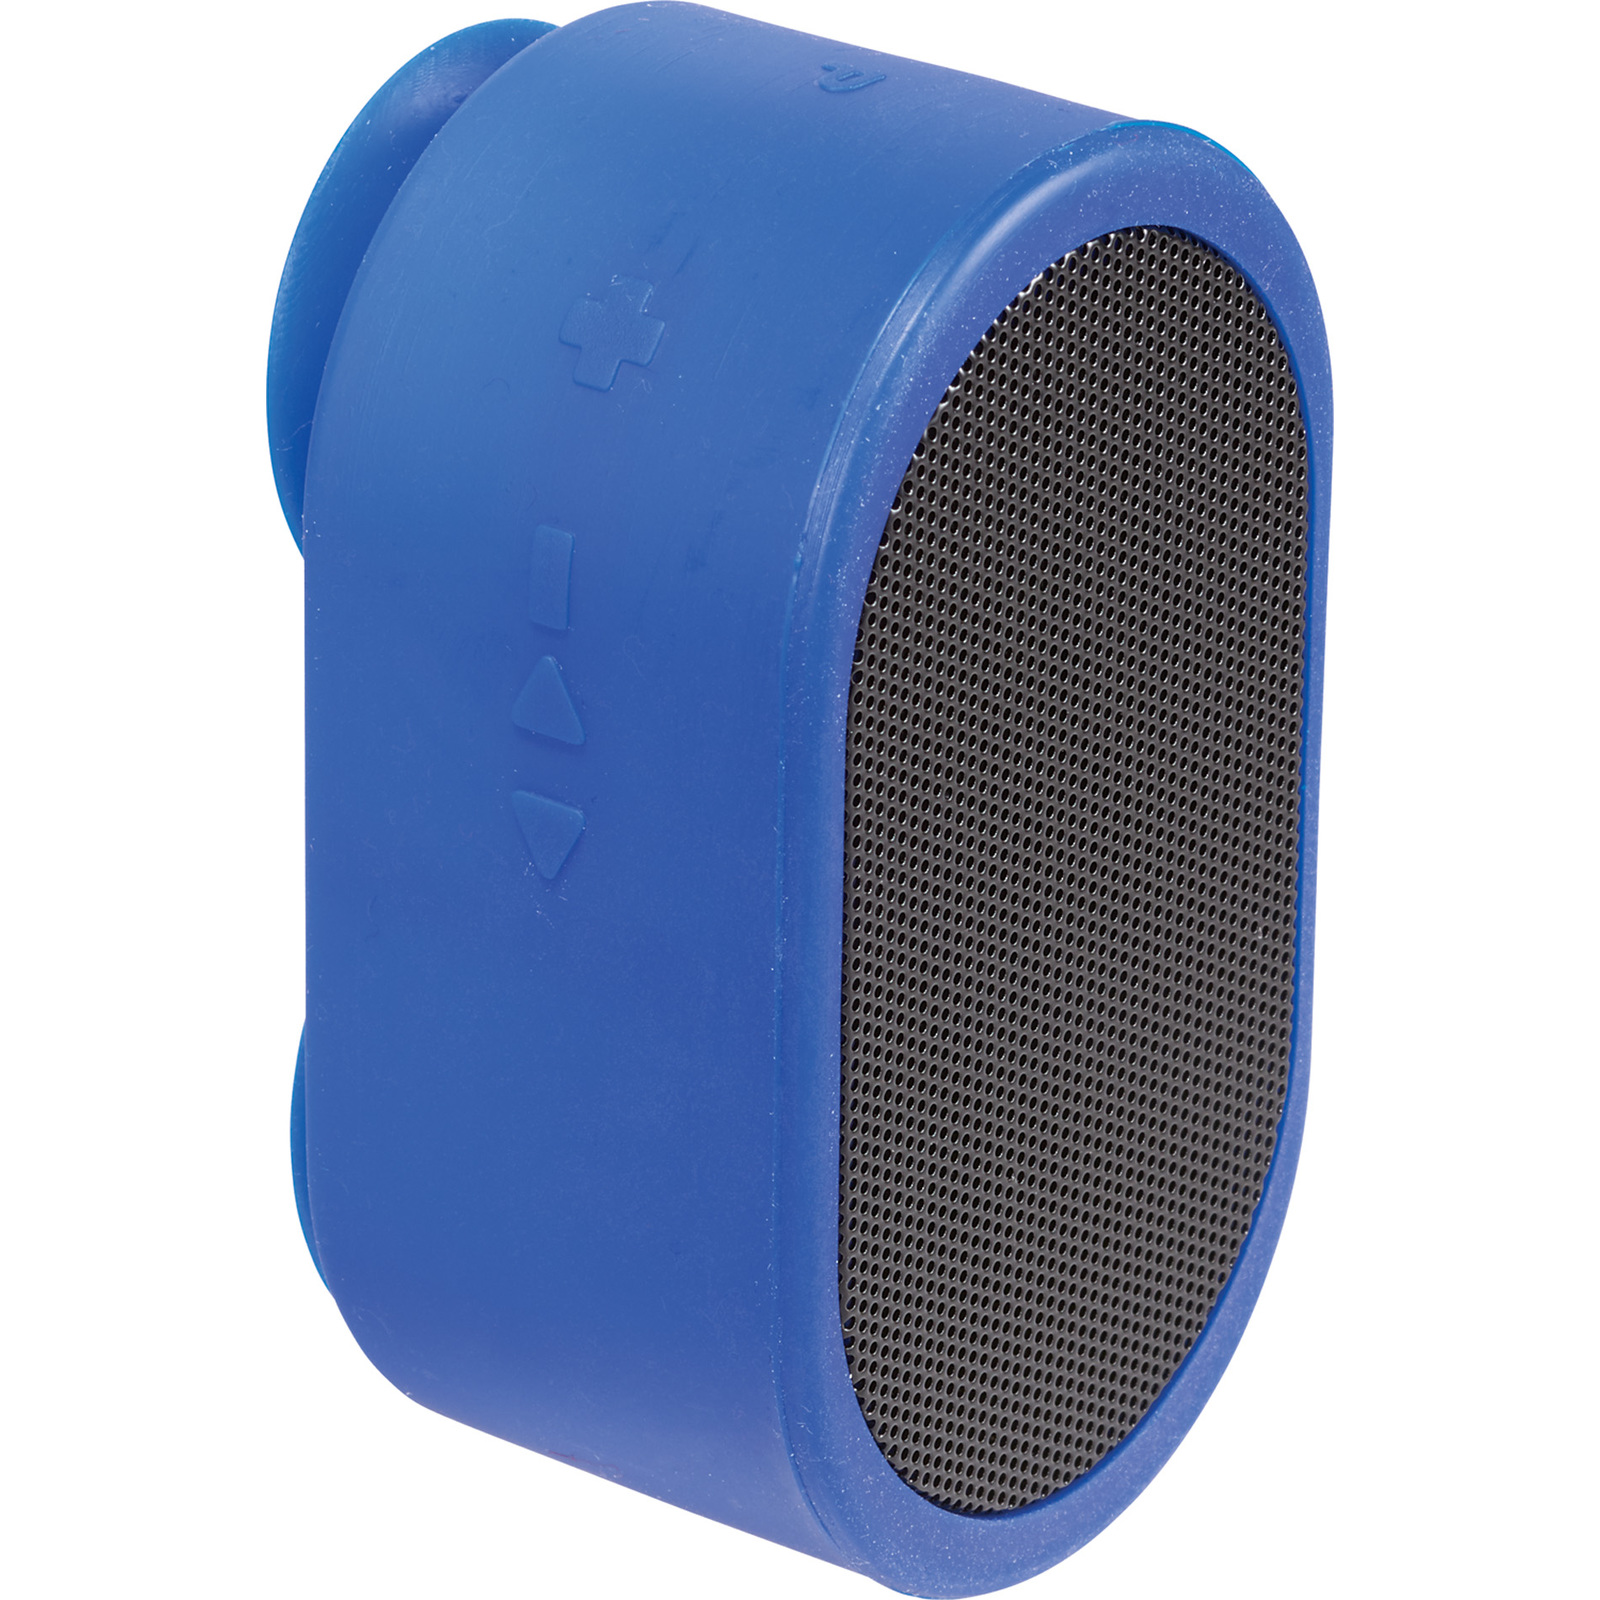 Bluetooth Shower and Outdoor Speaker